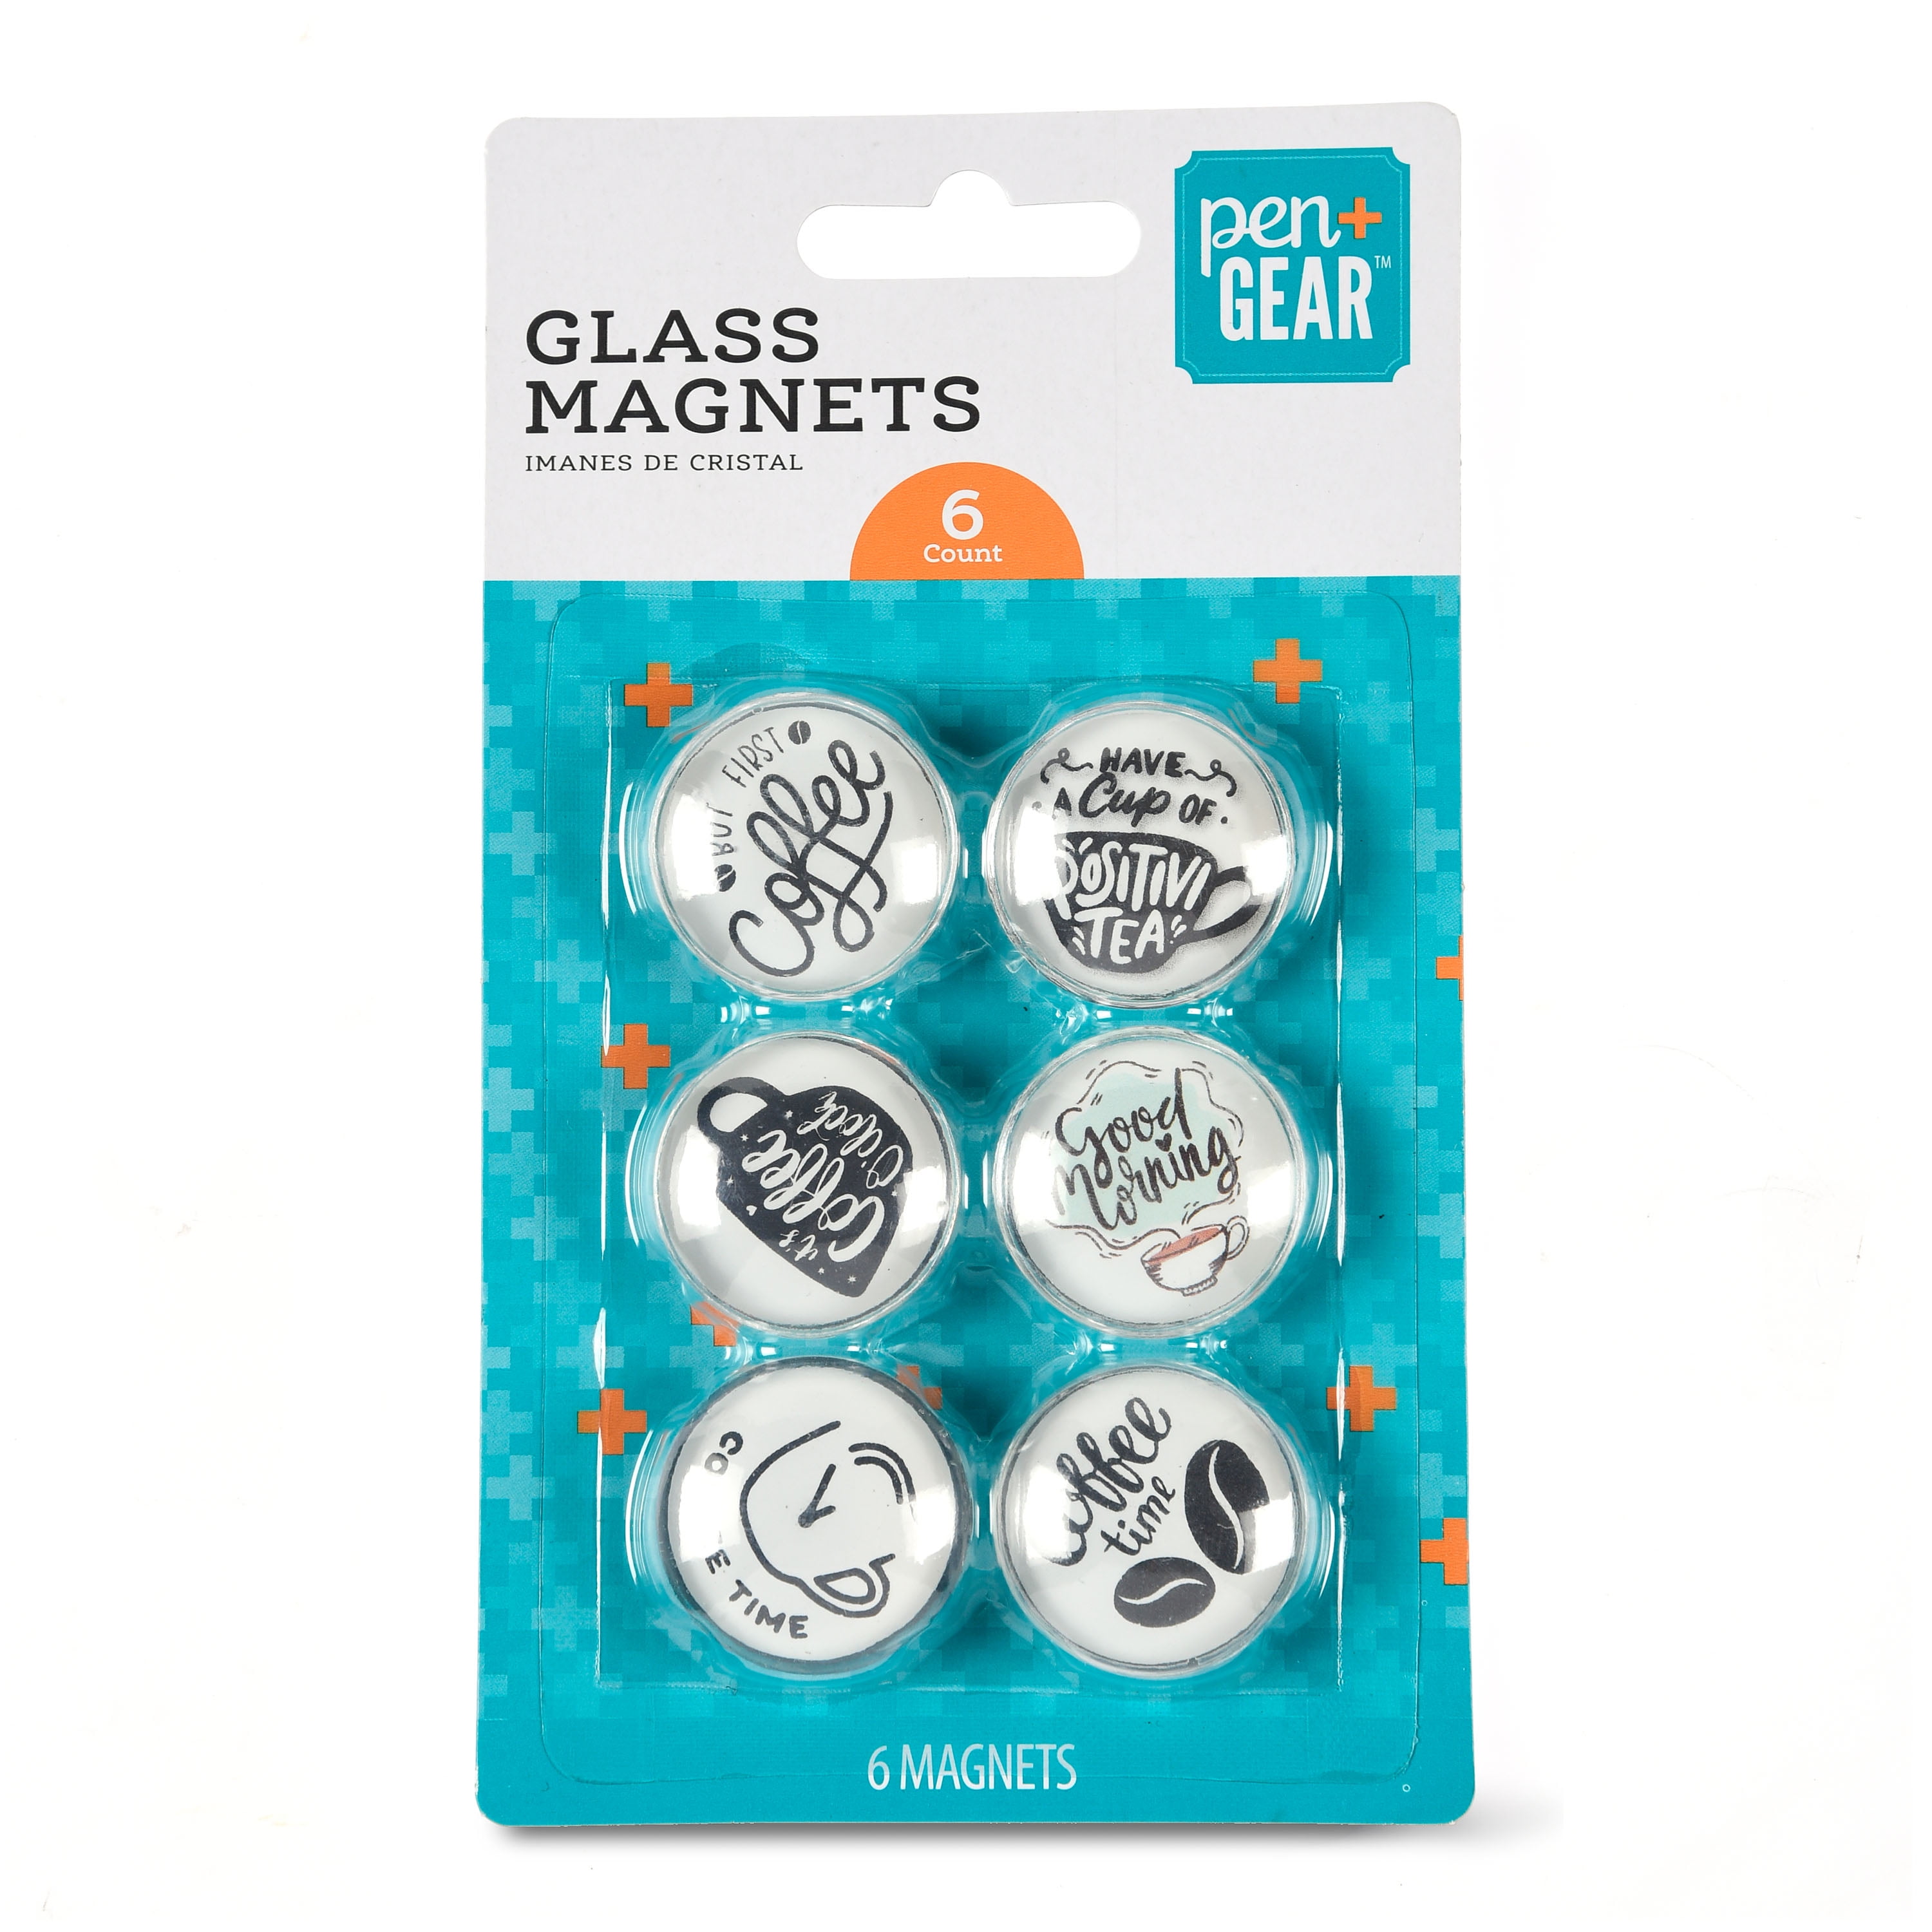 Pen + Gear Glass Magnets Clear 6 Counts